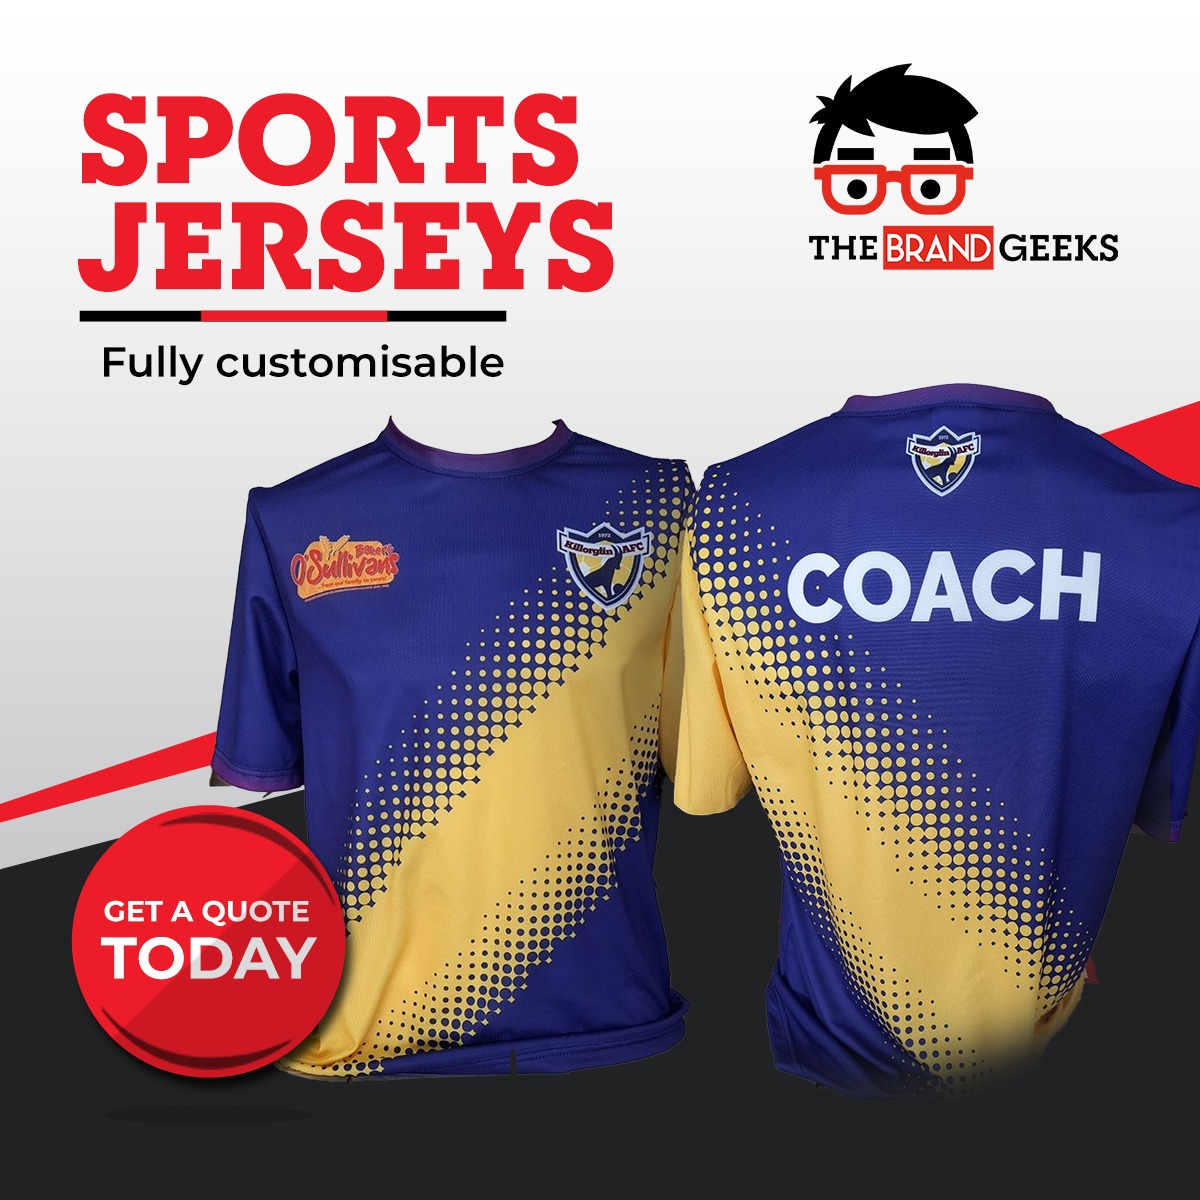 Looking for Branded Jersey / Training Tops for an event, talk to the Geeks today!
#sportsjersey #branding